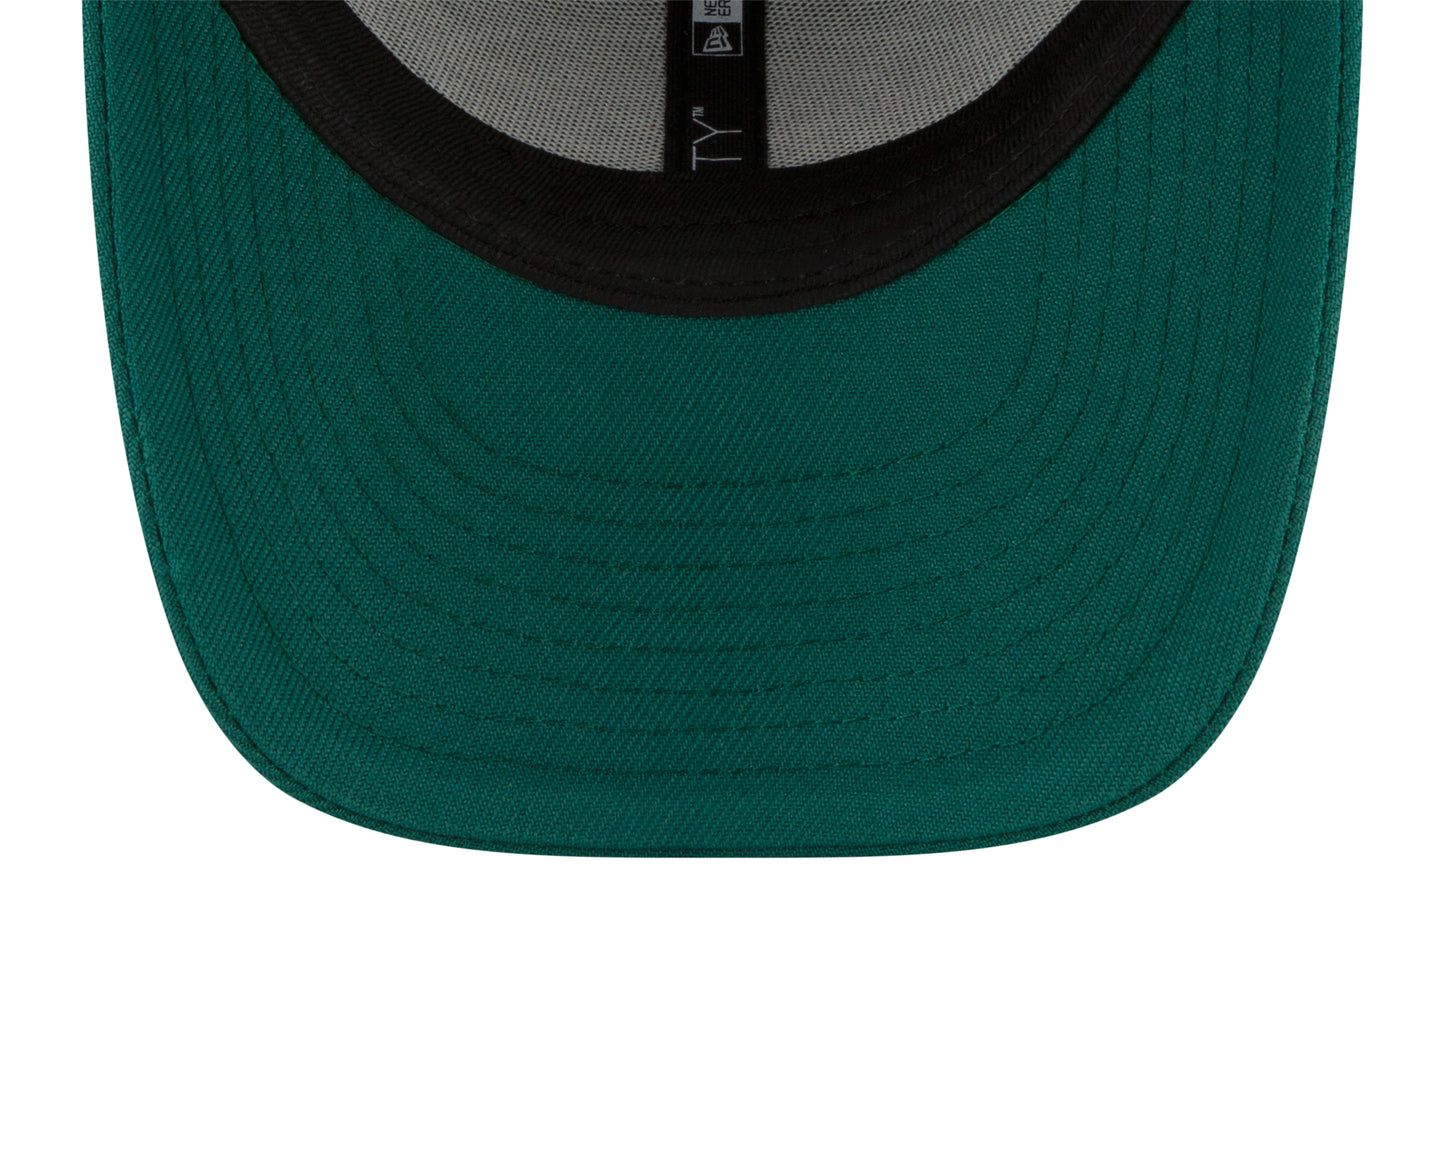 New York Jets The League 9Forty - Green - Headz Up 